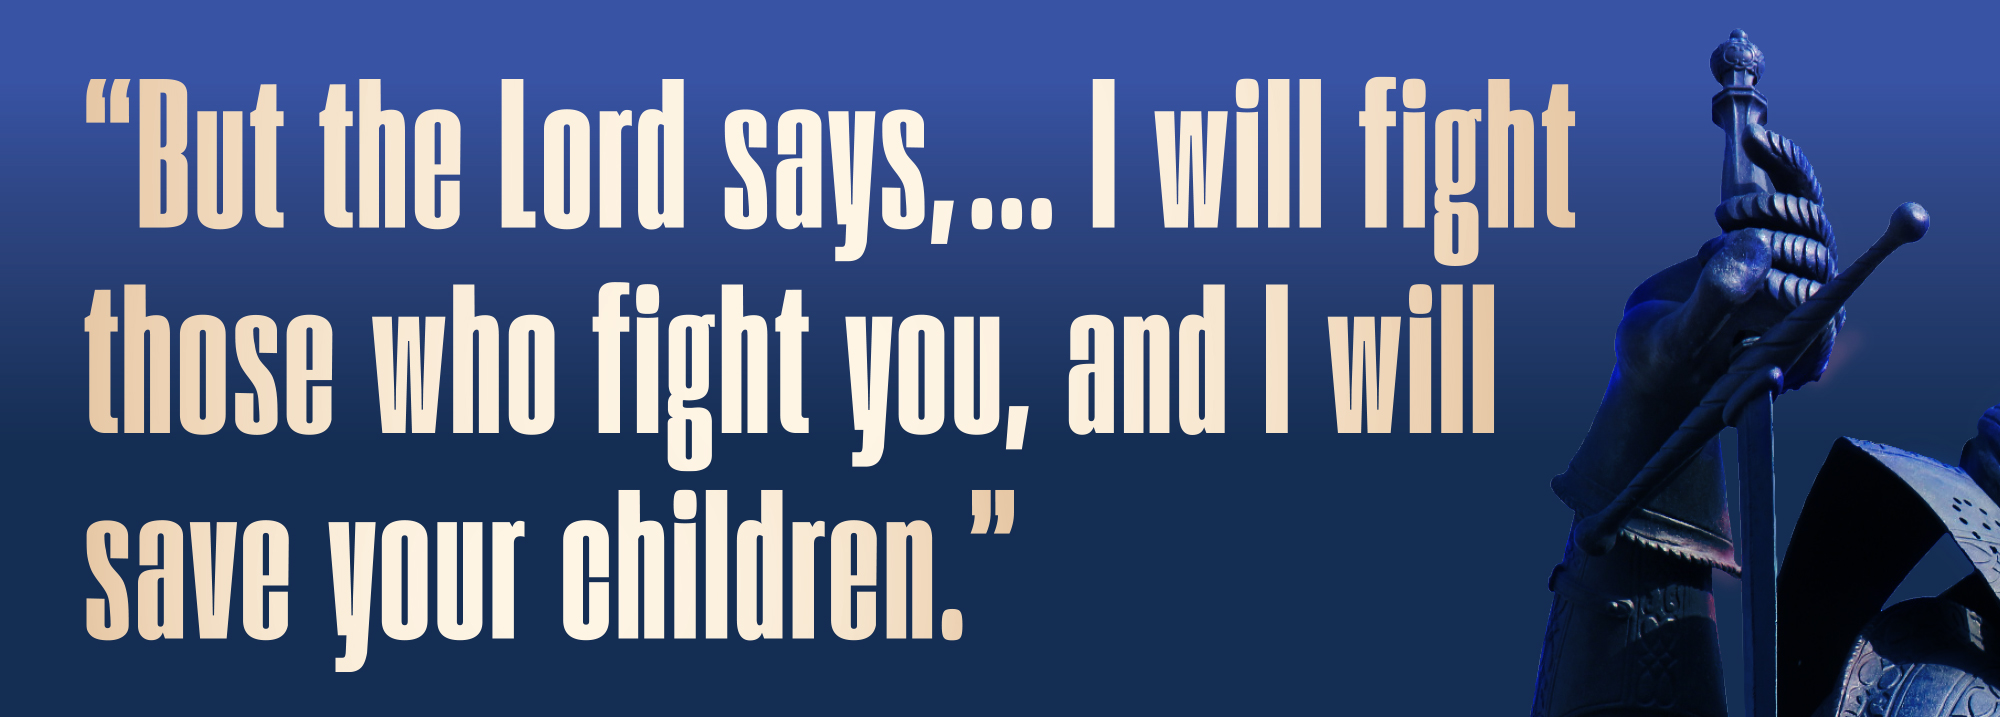 “But the Lord says,... I will fight those who fight you, and I will  save your children.”